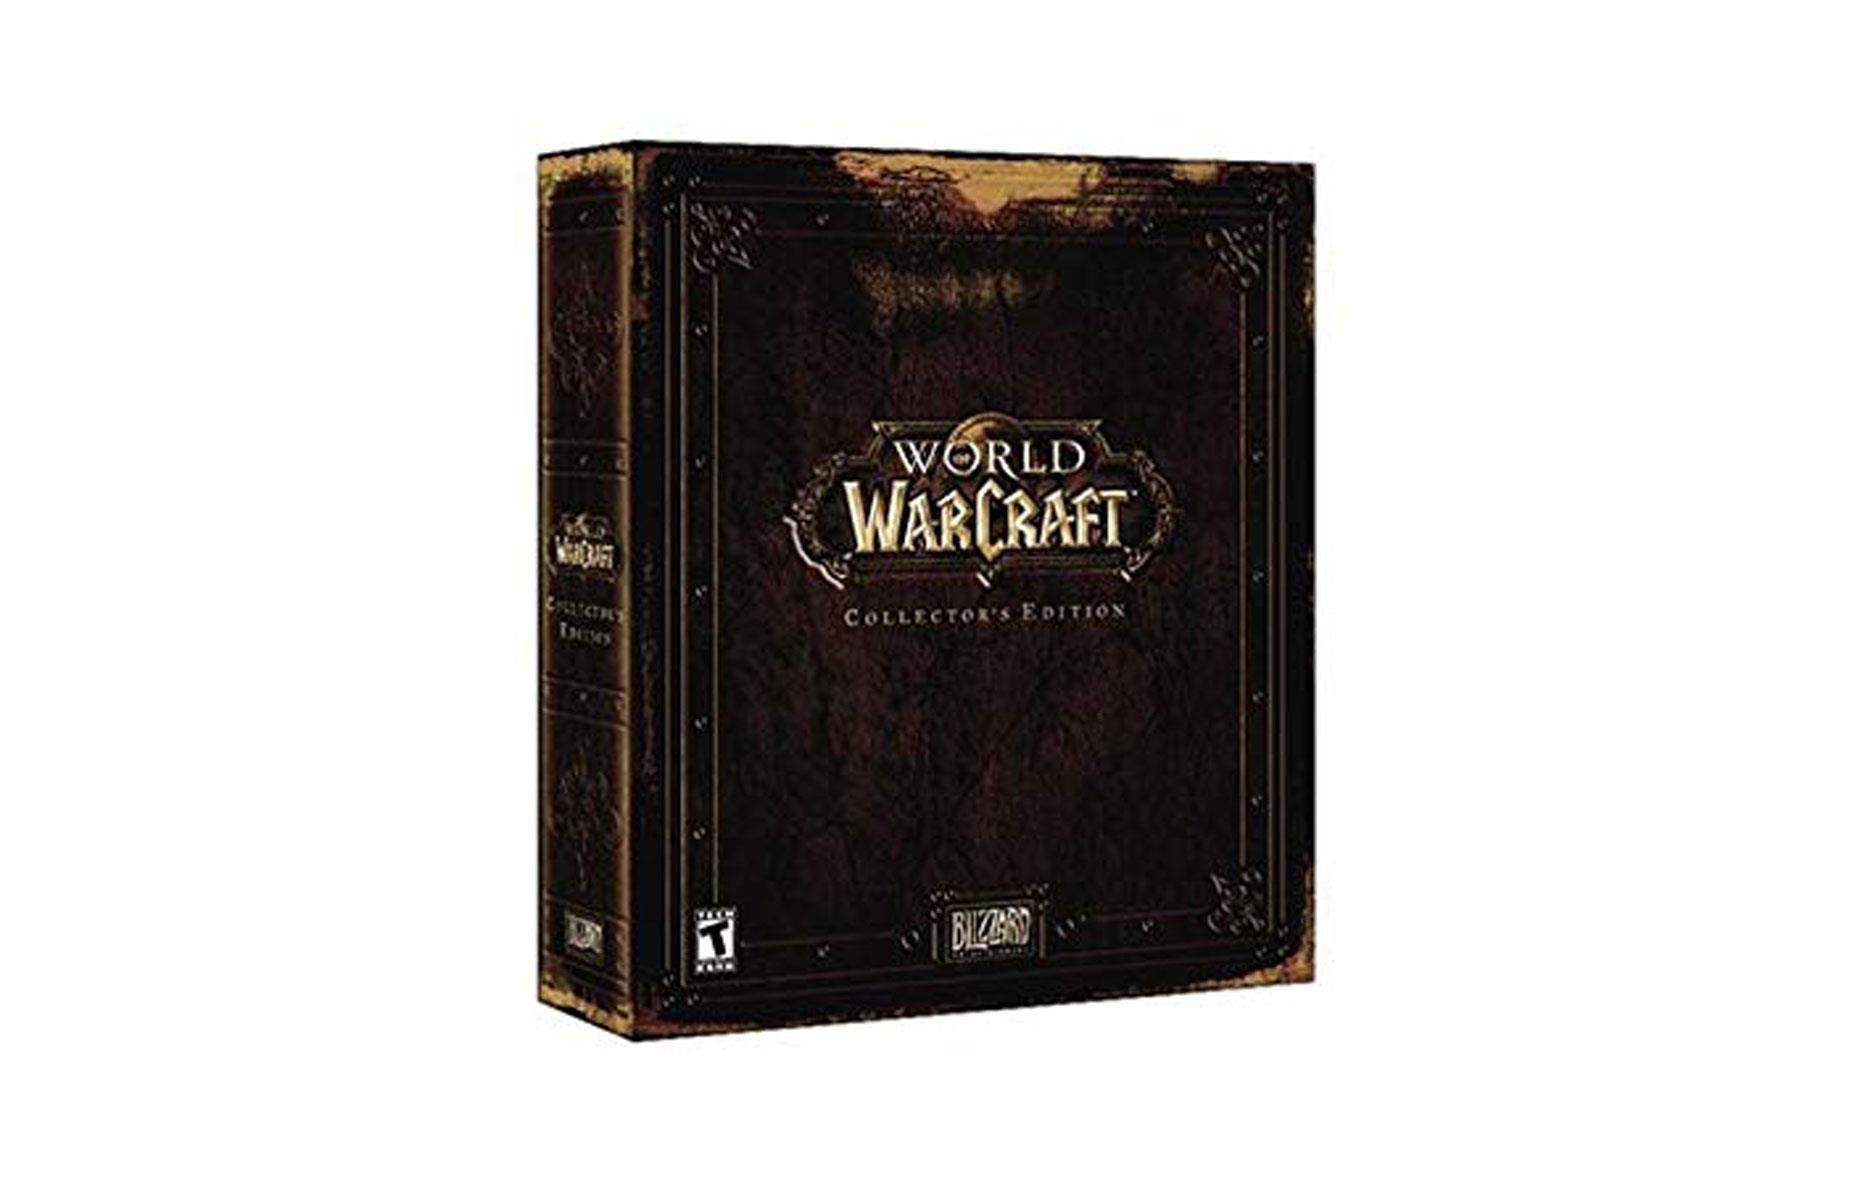 World of Warcraft Collector's Edition (Blizzard Entertainment) for PC, 2004: up to $4,300 (£3k)